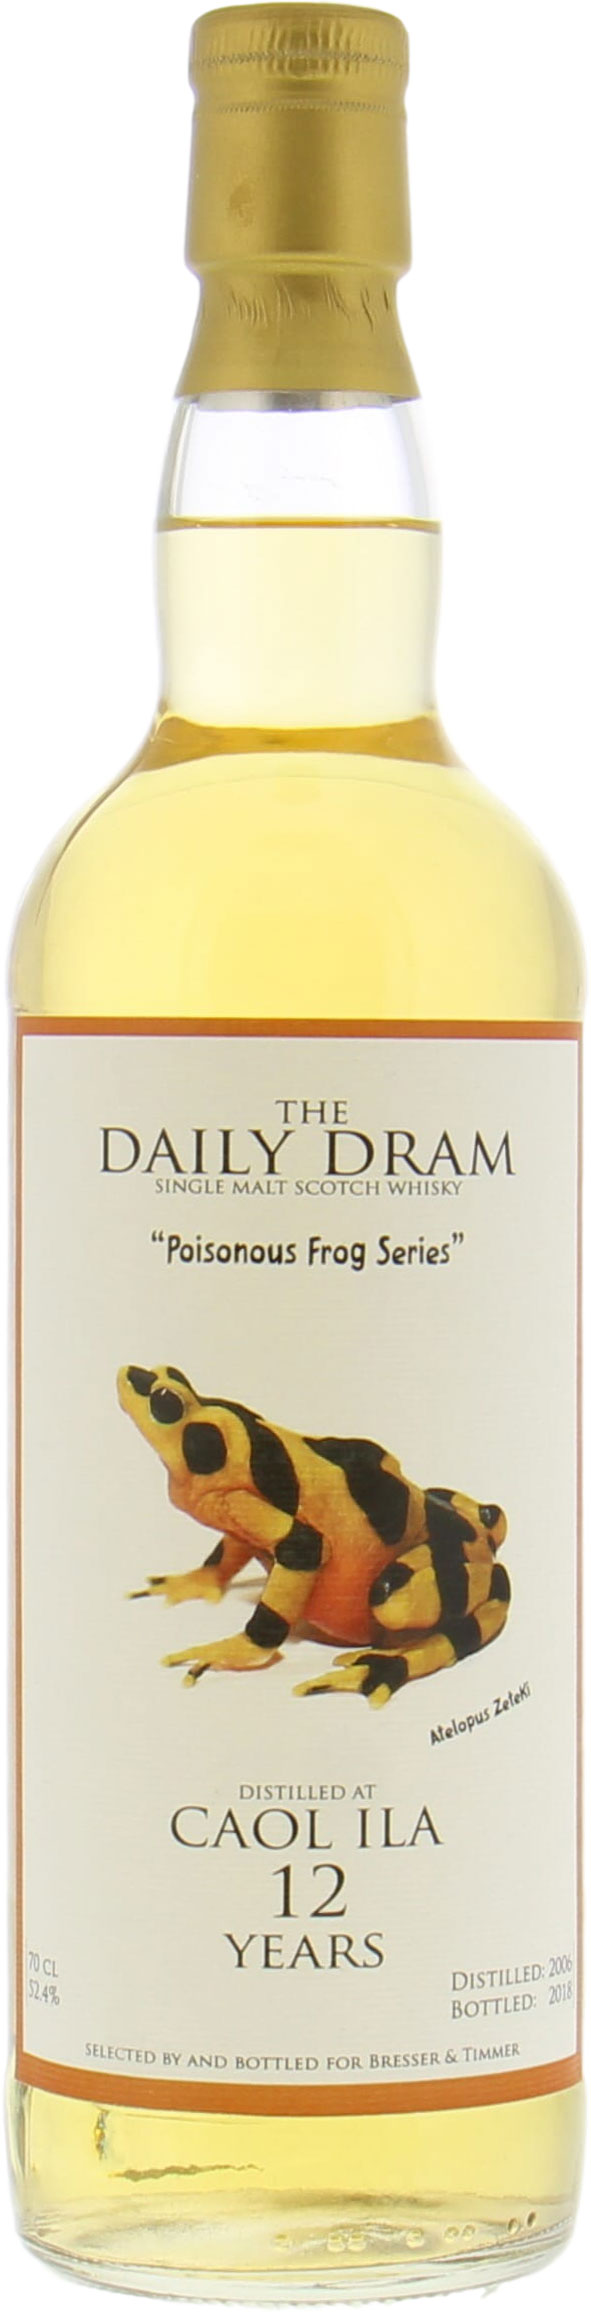 Caol Ila - Daily Dram 12 Years Old Poisonous Frog 52.4% 2006 Perfect